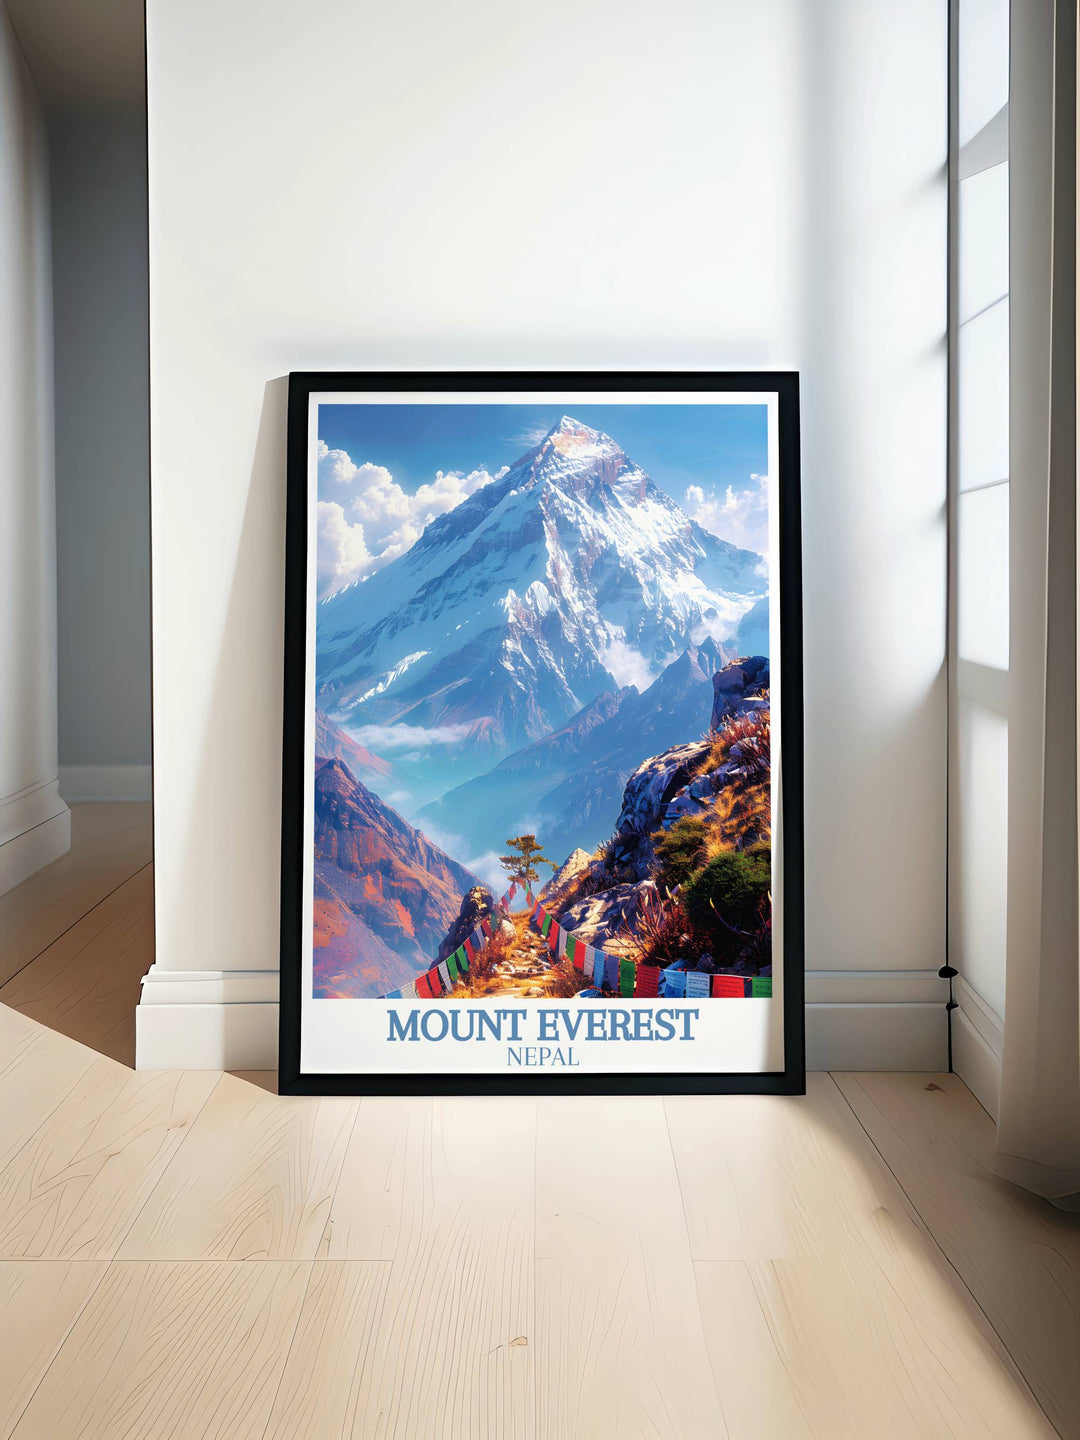 Mount Everest Gallery Wall Art depicting the summit in early morning light, ideal for those who dream of reaching the top.